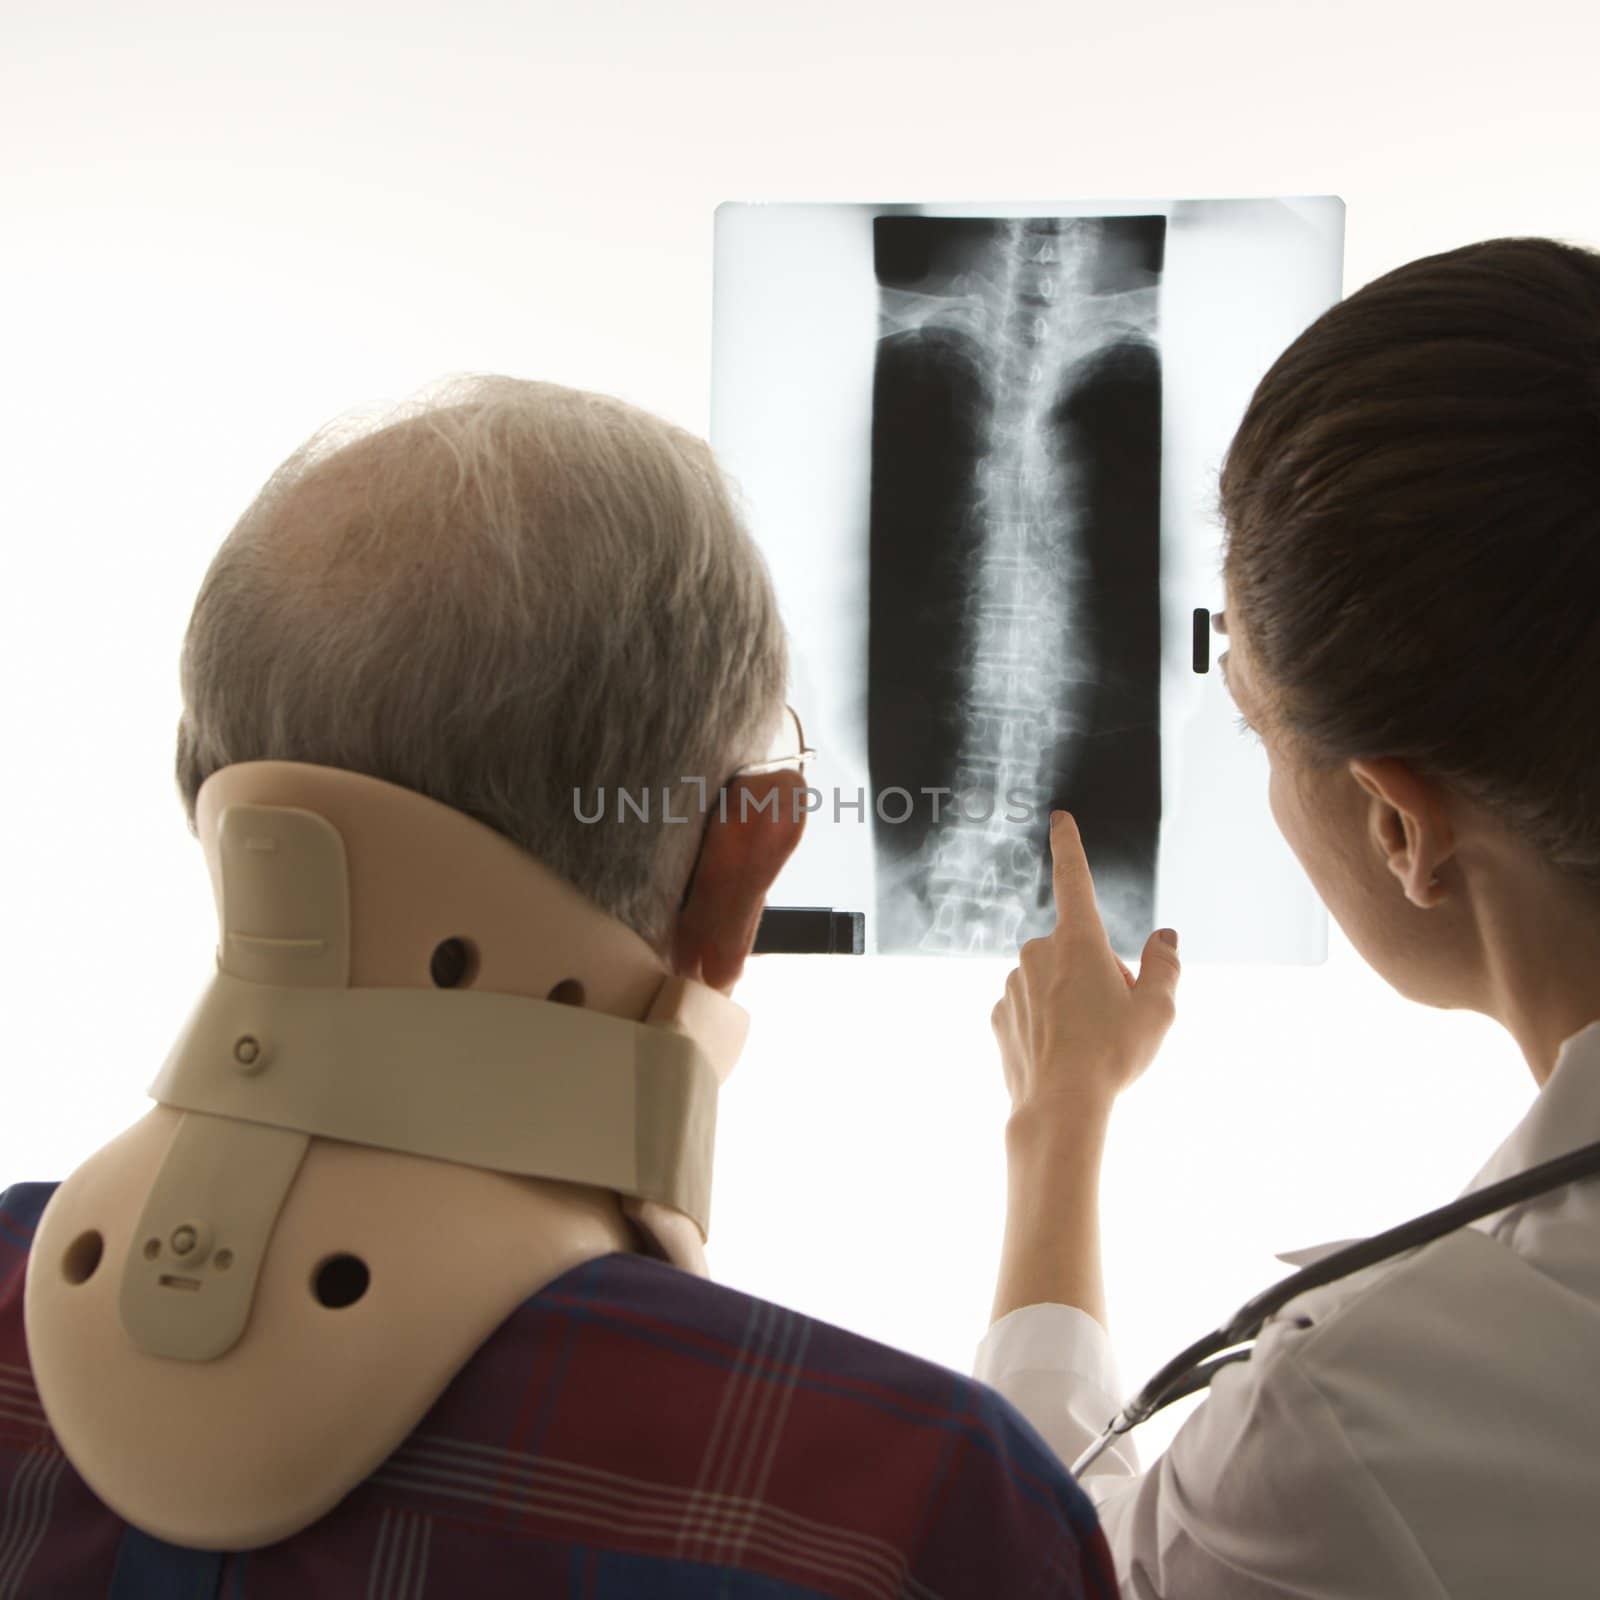 Over the shoulders view of mid-adult Caucasian female pointing at an x-ray as elderly Caucasian male in neck brace looks on.